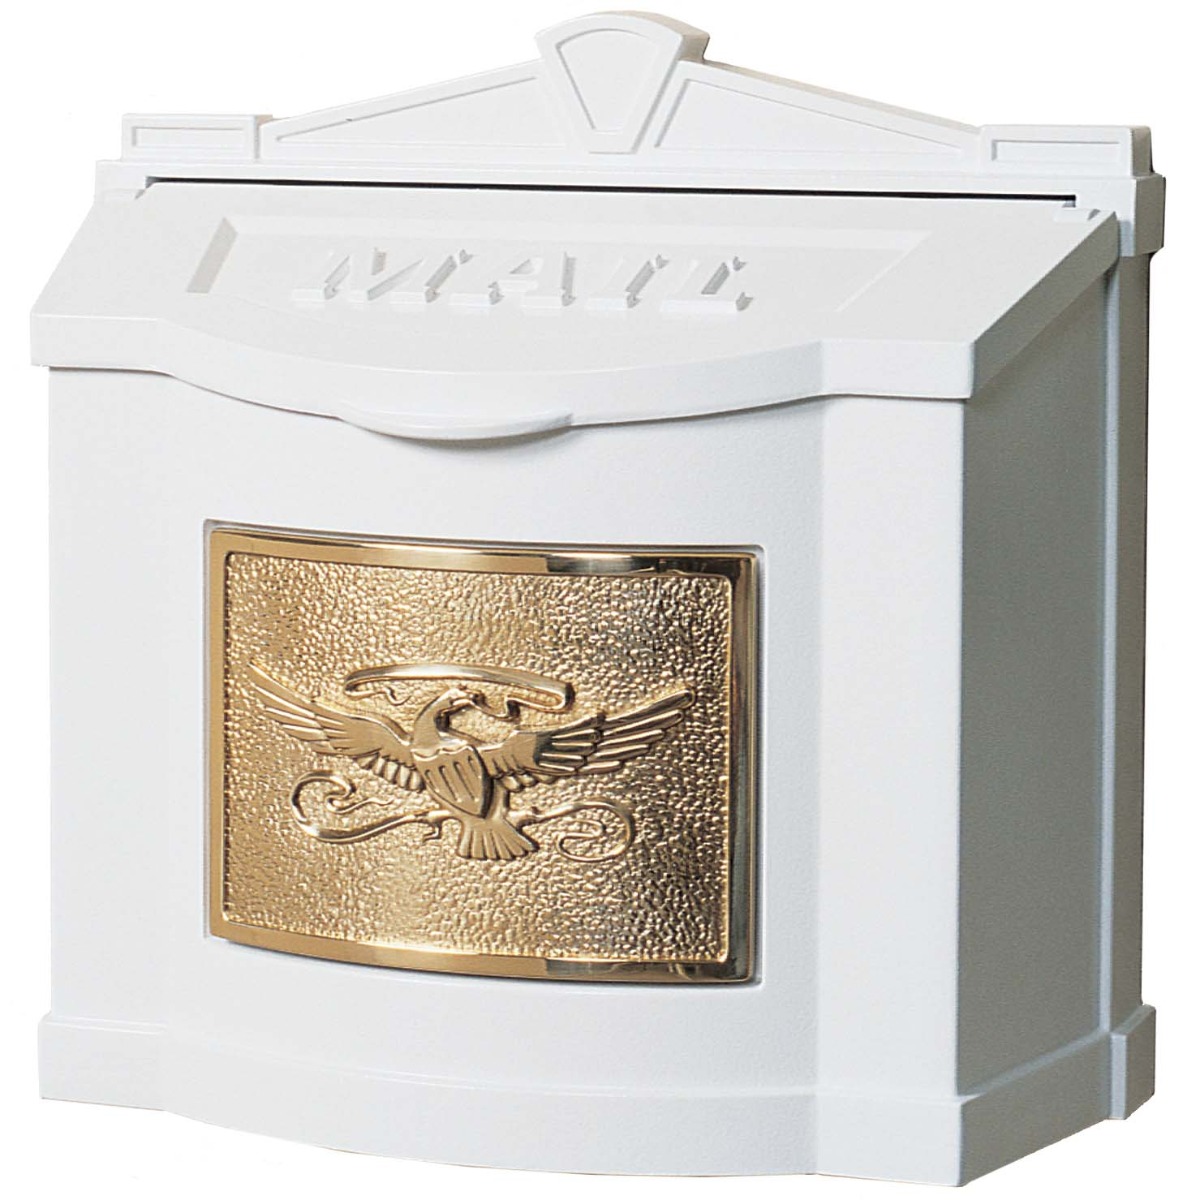 Wall Mount Mailbox with Eagle Emblem